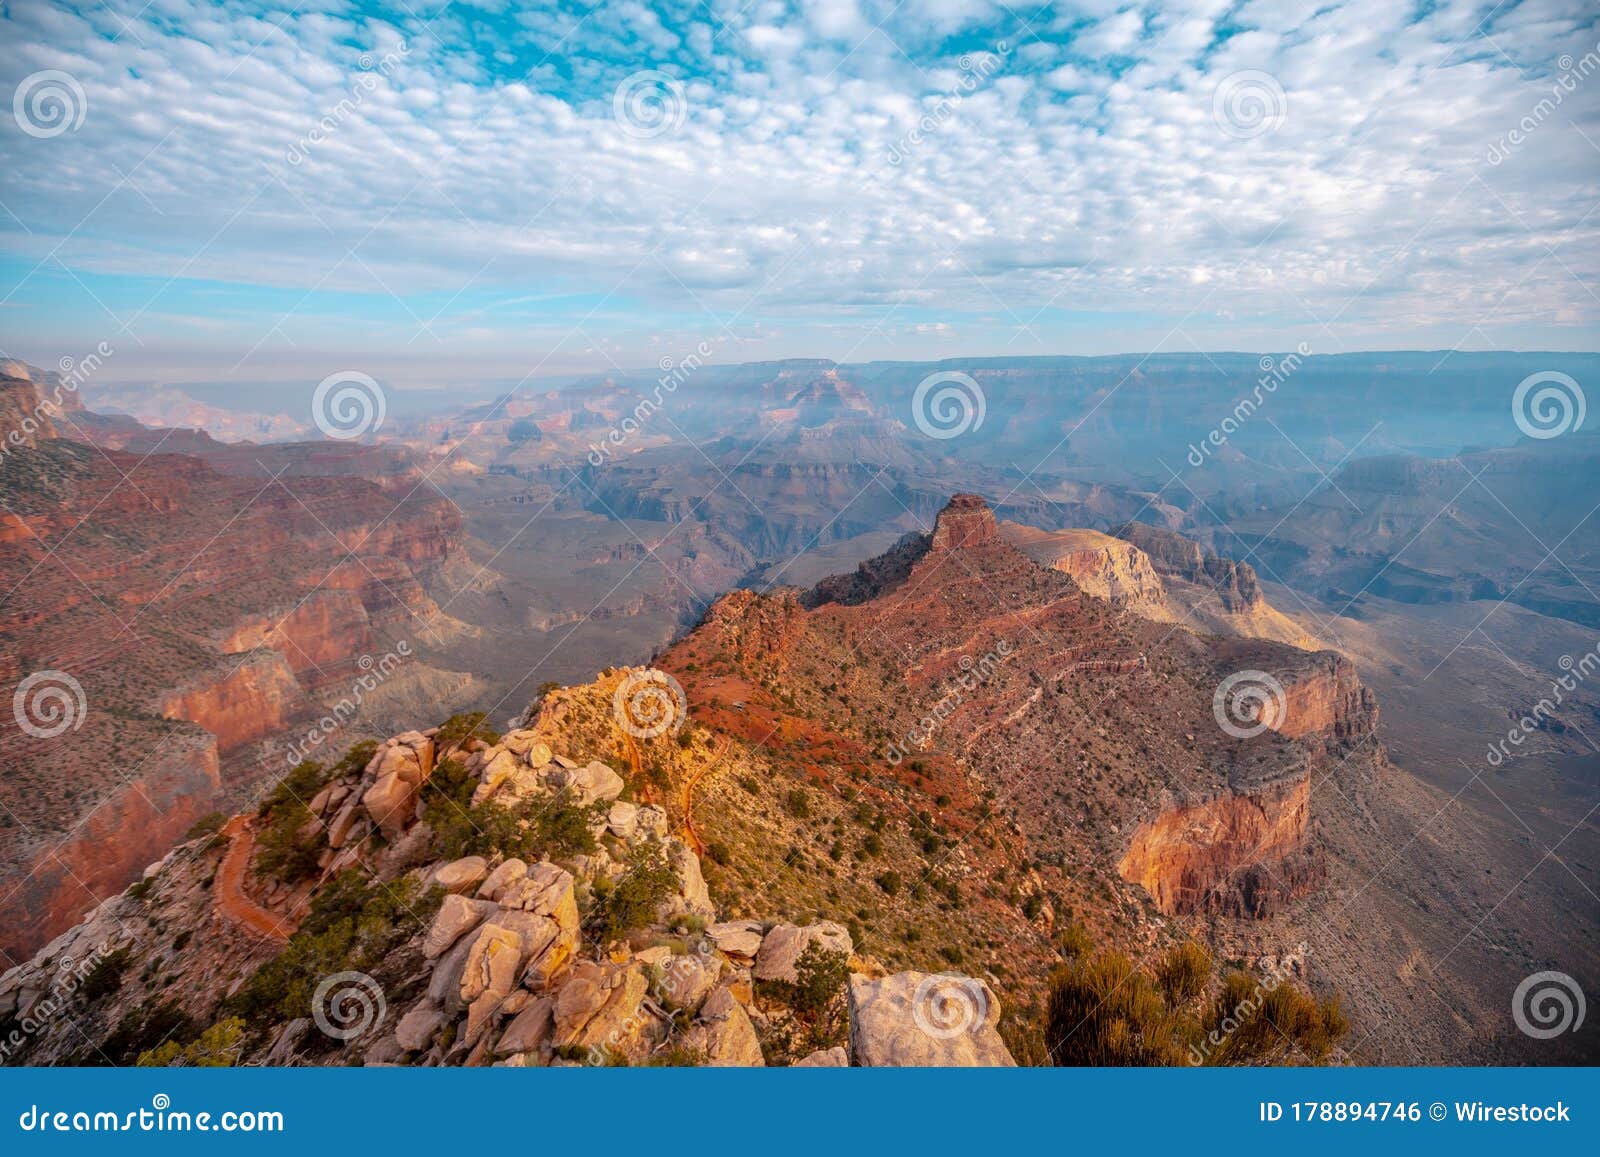 Beautiful Shot of the Landscape of Hills in the Grand Canyon Under a ...